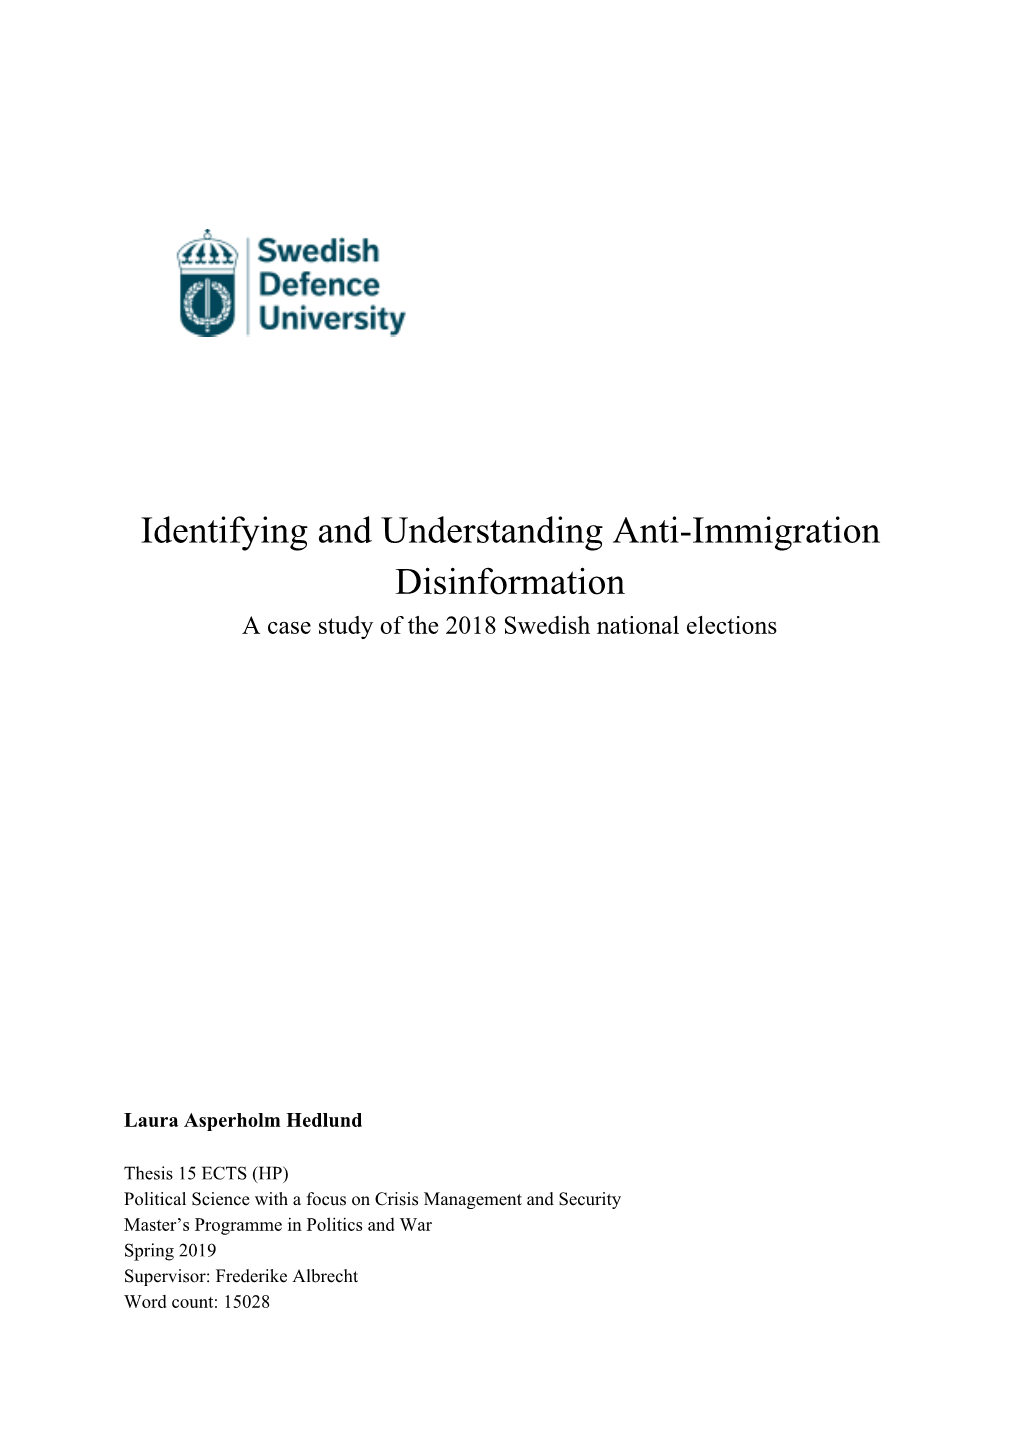 Identifying and Understanding Anti-Immigration Disinformation a Case Study of the 2018 Swedish National Elections